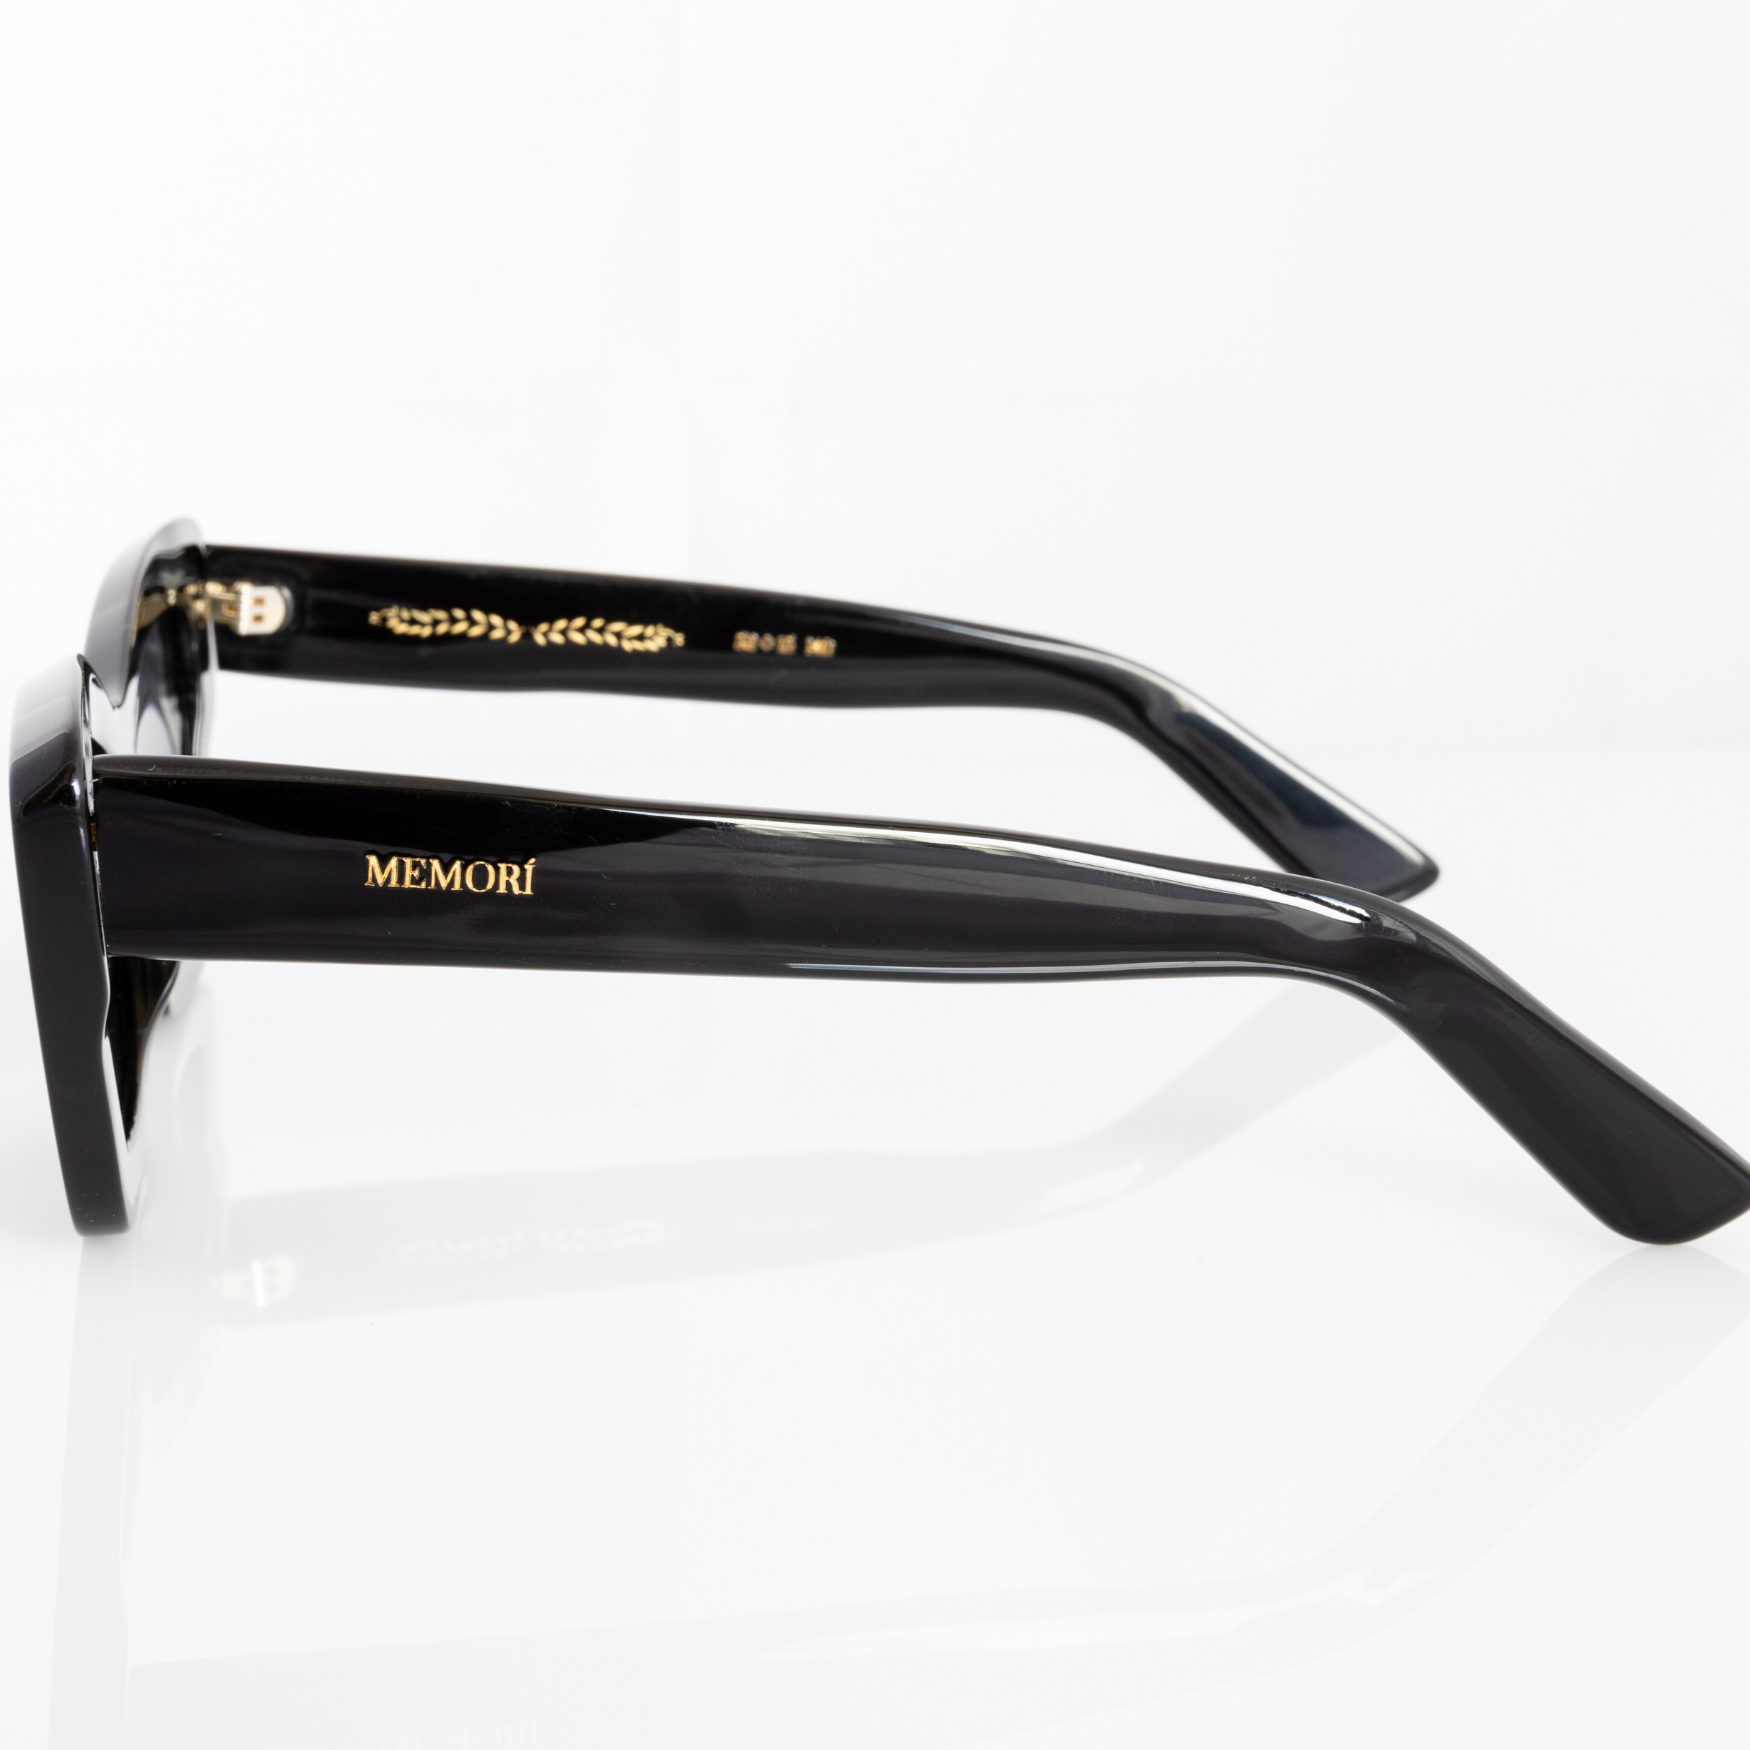 Black polarized cat eye sunglasses - side profile view shows Memorí logo in gold on external temple arm, and gold foil laurel design on internal temple as a design detail. Designed to have smaller fit for narrow faces. 